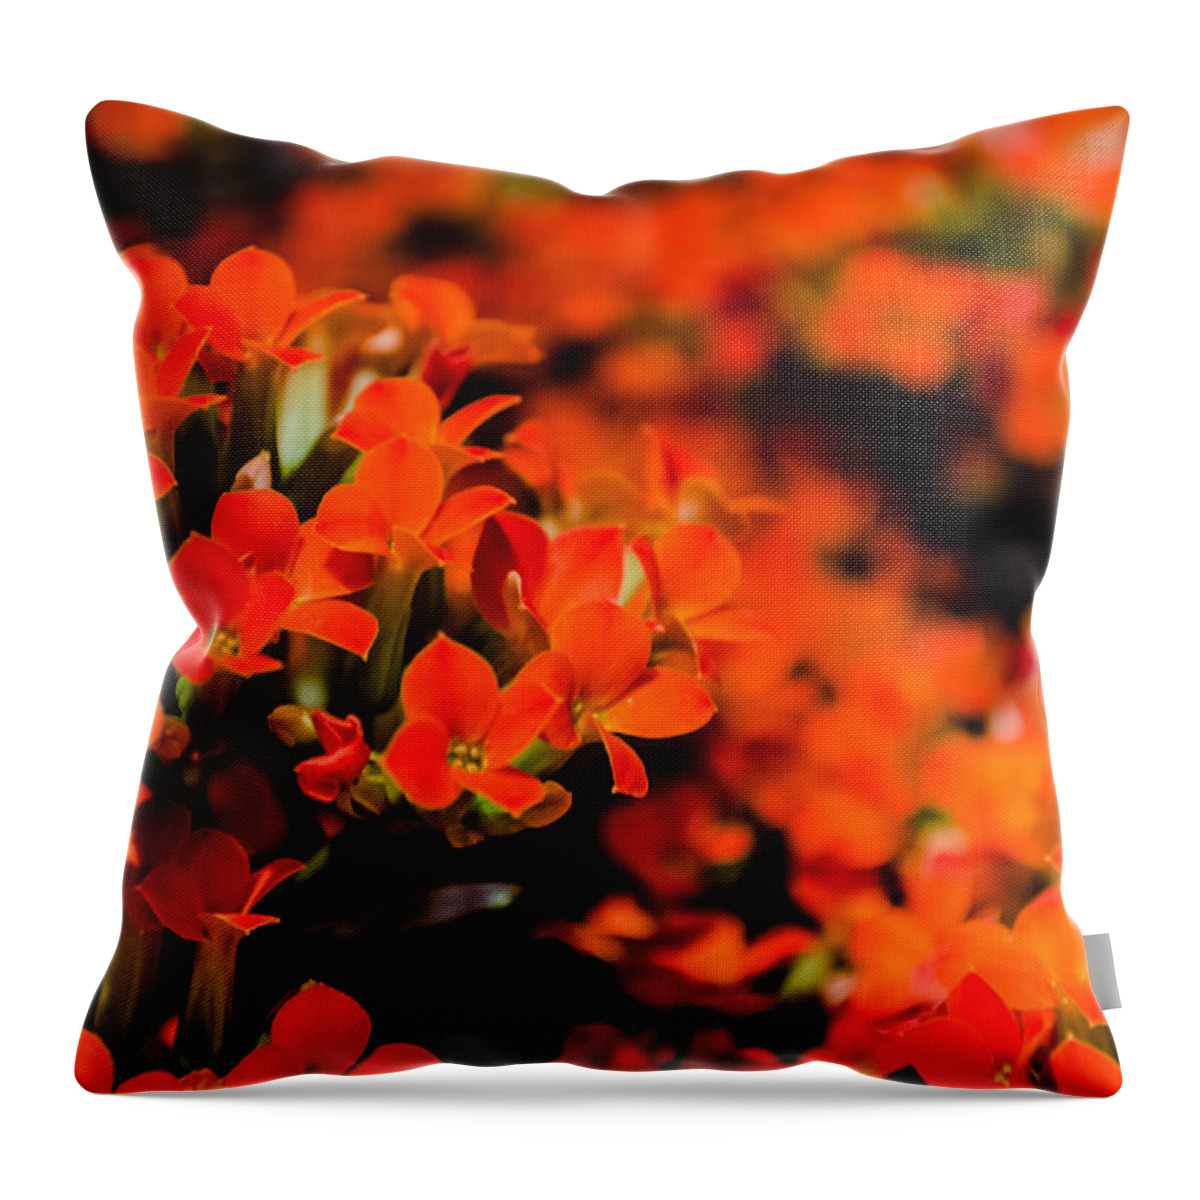 1855mm Throw Pillow featuring the photograph Flower Macro 1 by Alan Marlowe